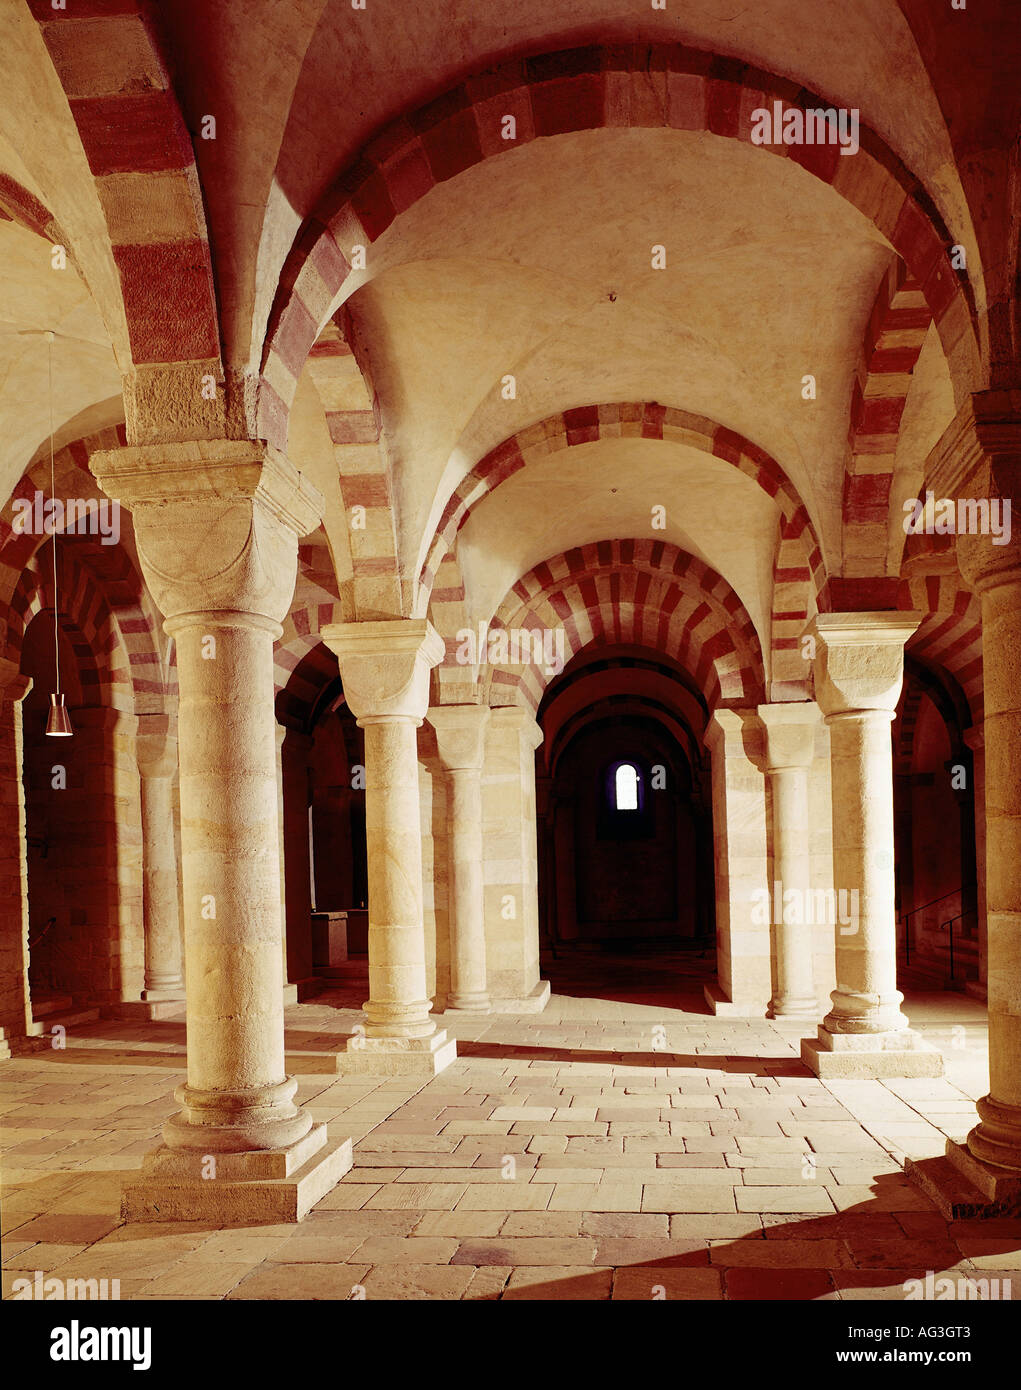 geography/travel, Germany, Rhineland-Palatinate, Speyer, churches and convents, Speyer cathedral, interior view, crypt, 1030 - 1061, , Additional-Rights-Clearance-Info-Not-Available Stock Photo